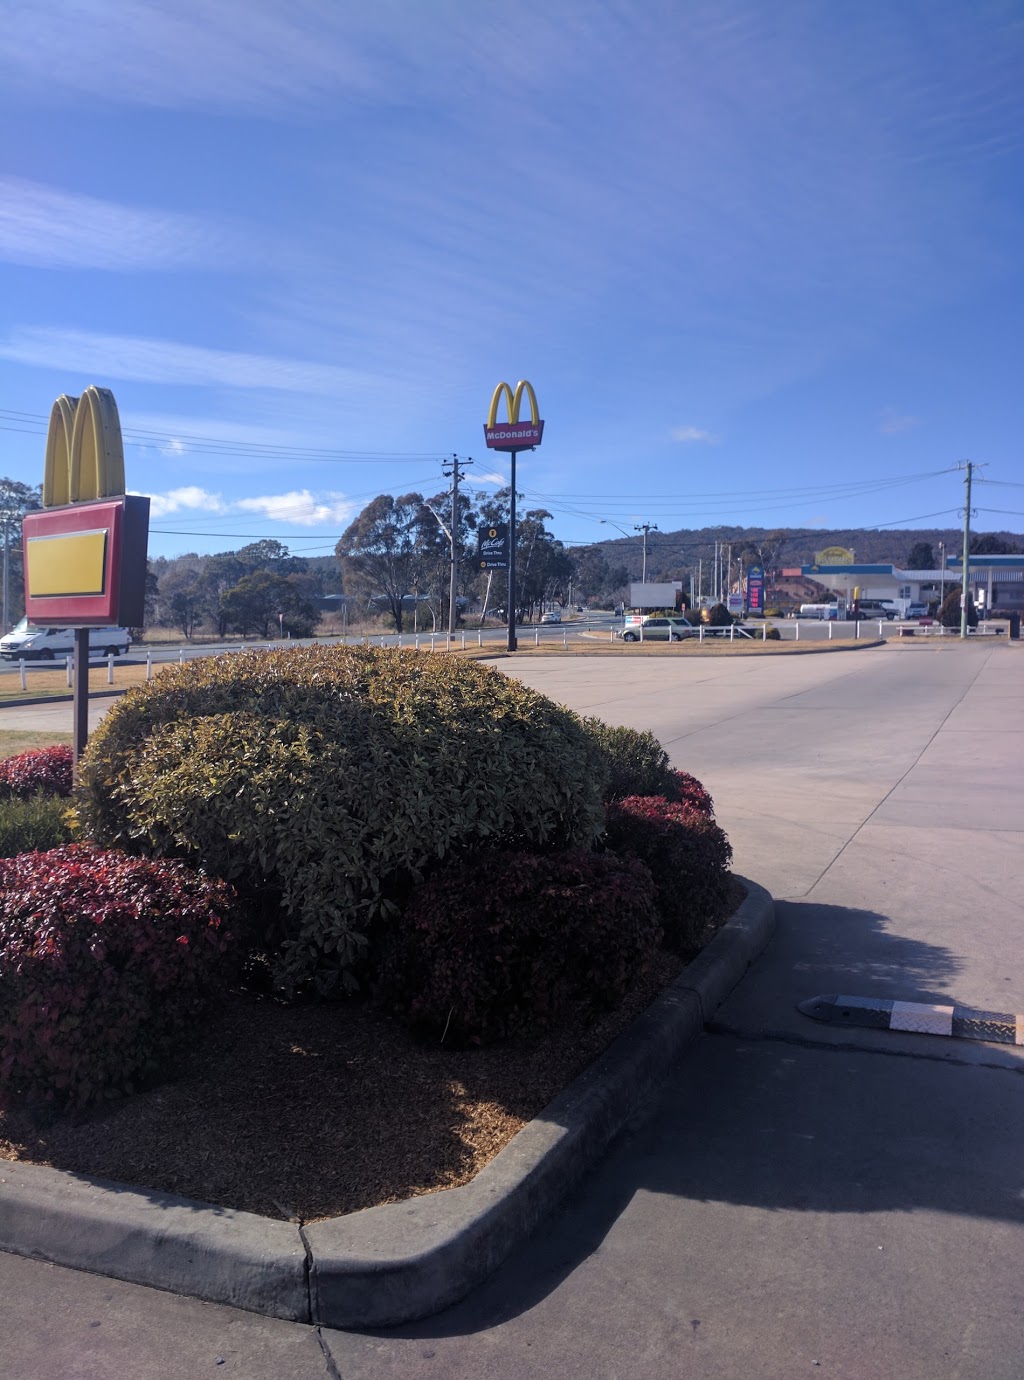 Goulburn Gateway Service Station | gas station | Hume Highway, Common St, Goulburn NSW 2580, Australia | 0248219811 OR +61 2 4821 9811